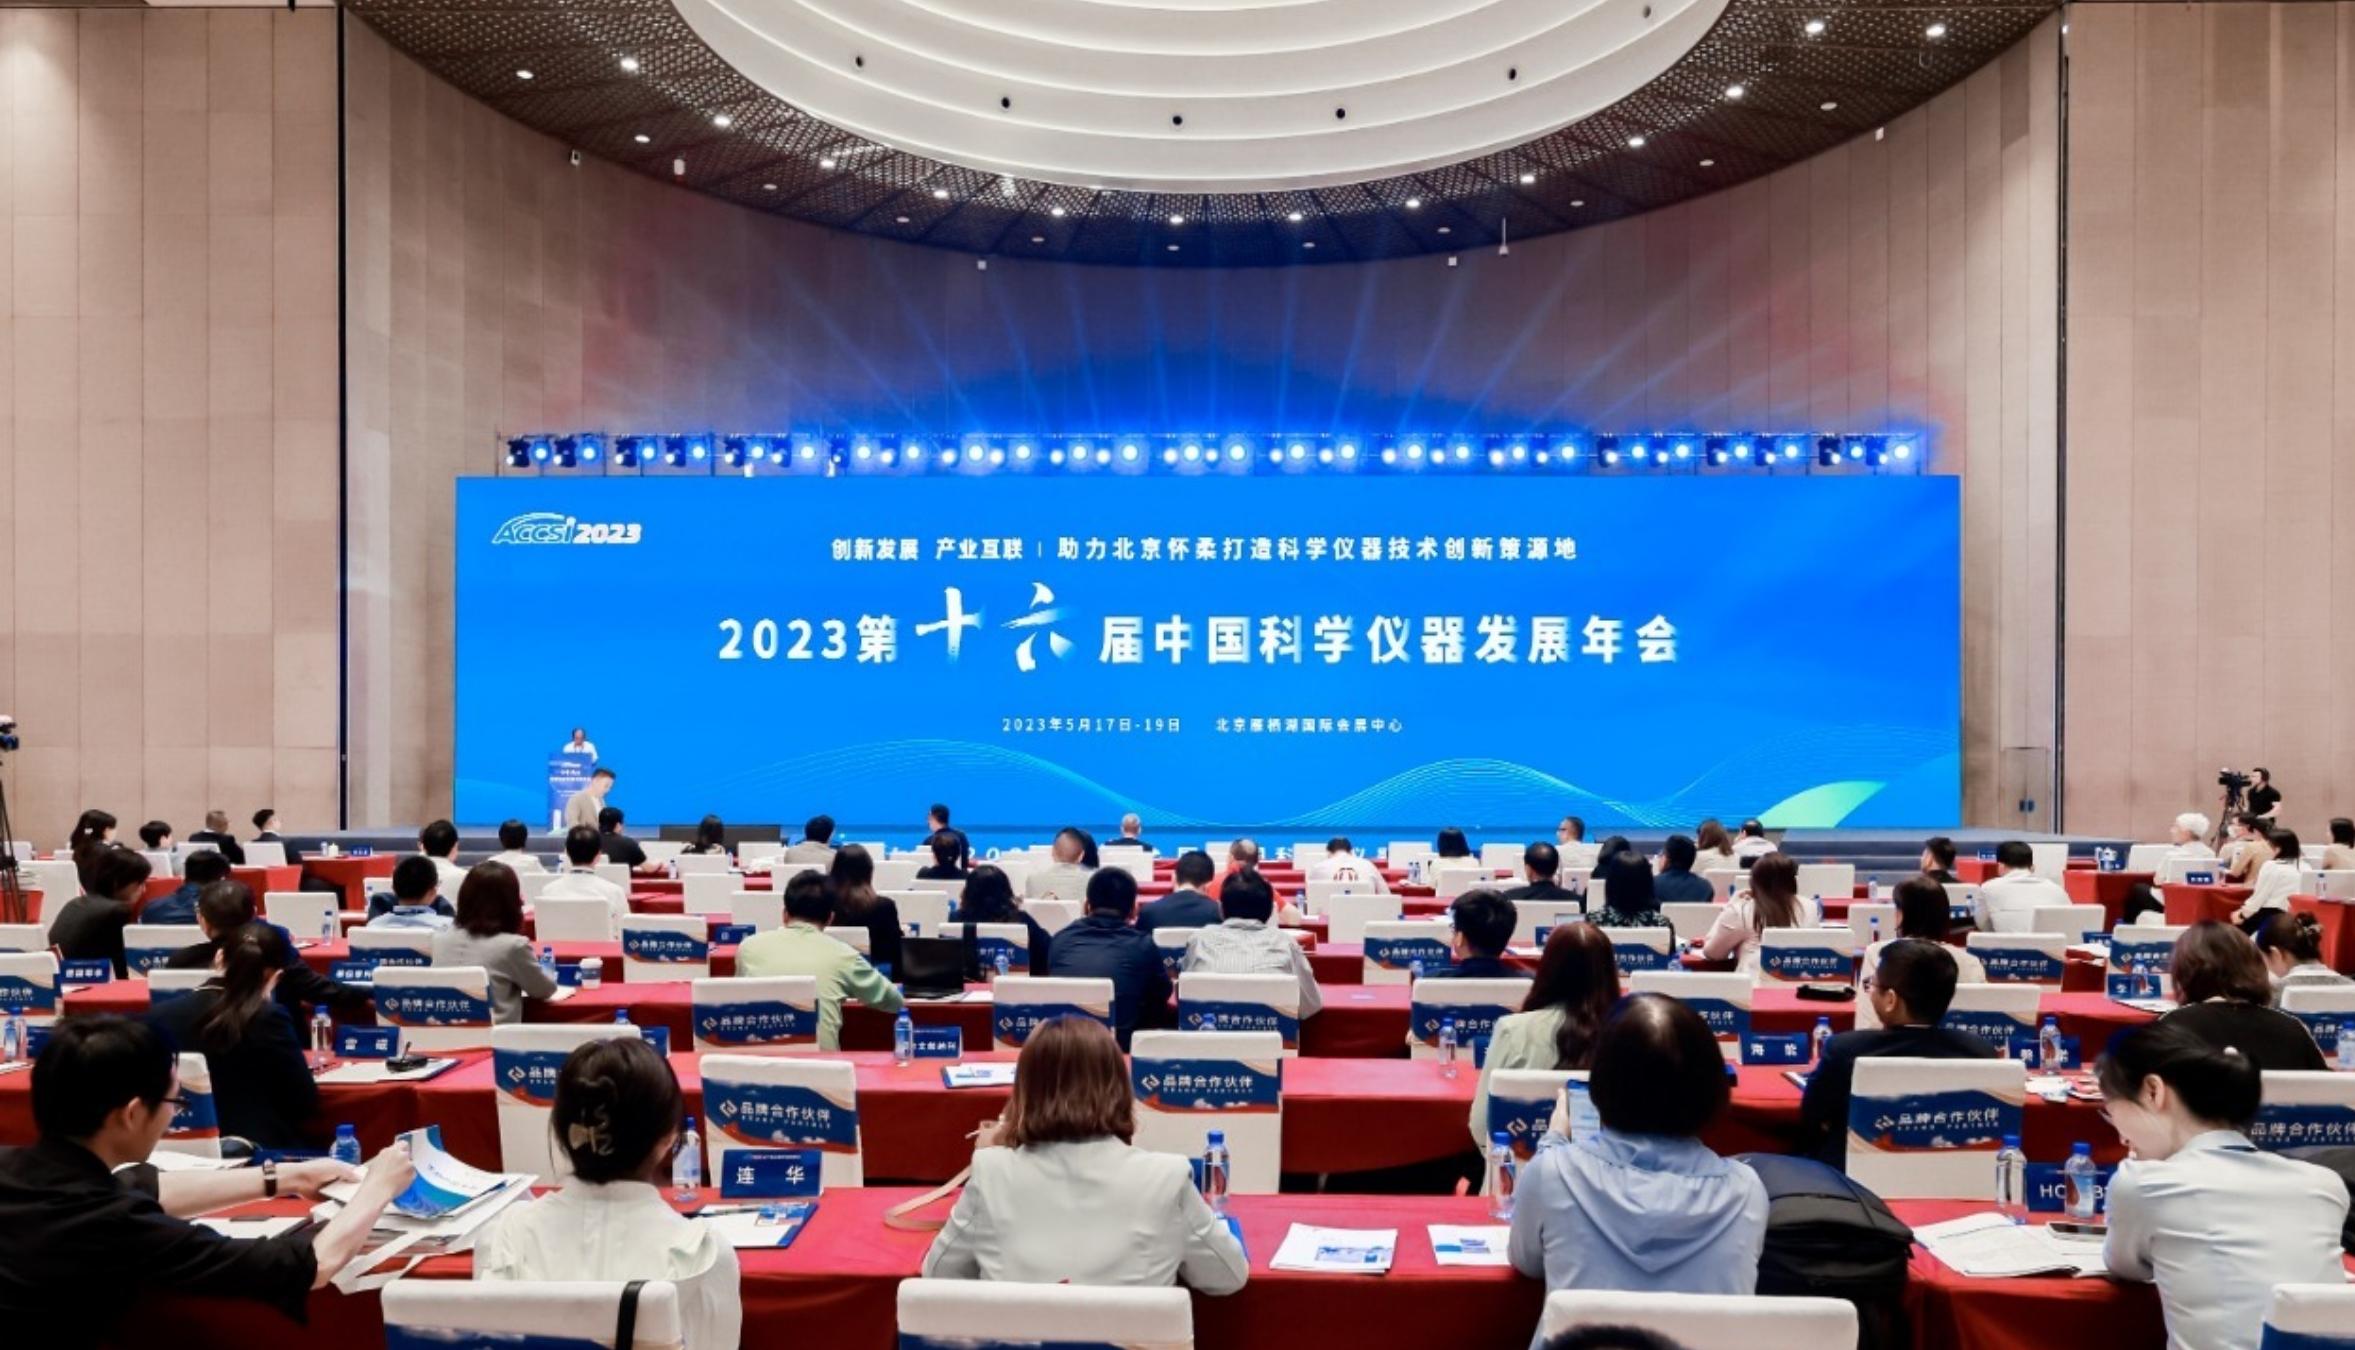 FPI Founders Wang Jian And Yao Naxin Invited to Attend the 16th ACCSI, Featuring In-Depth Discussions with Experts and Keynote Presentations